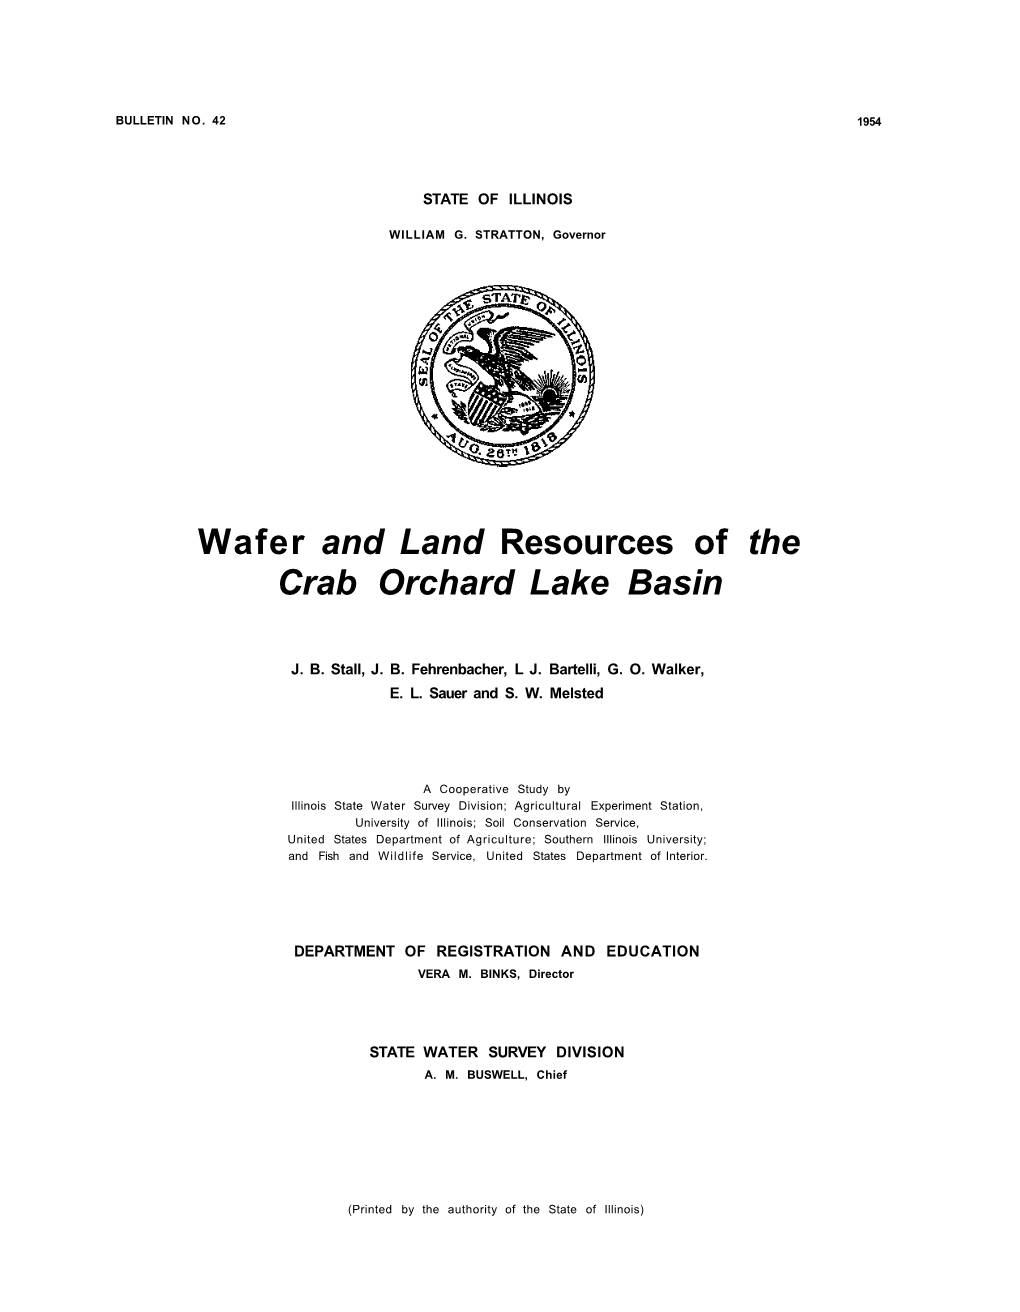 Water and Land Resources of the Crab Orchard Lake Basin